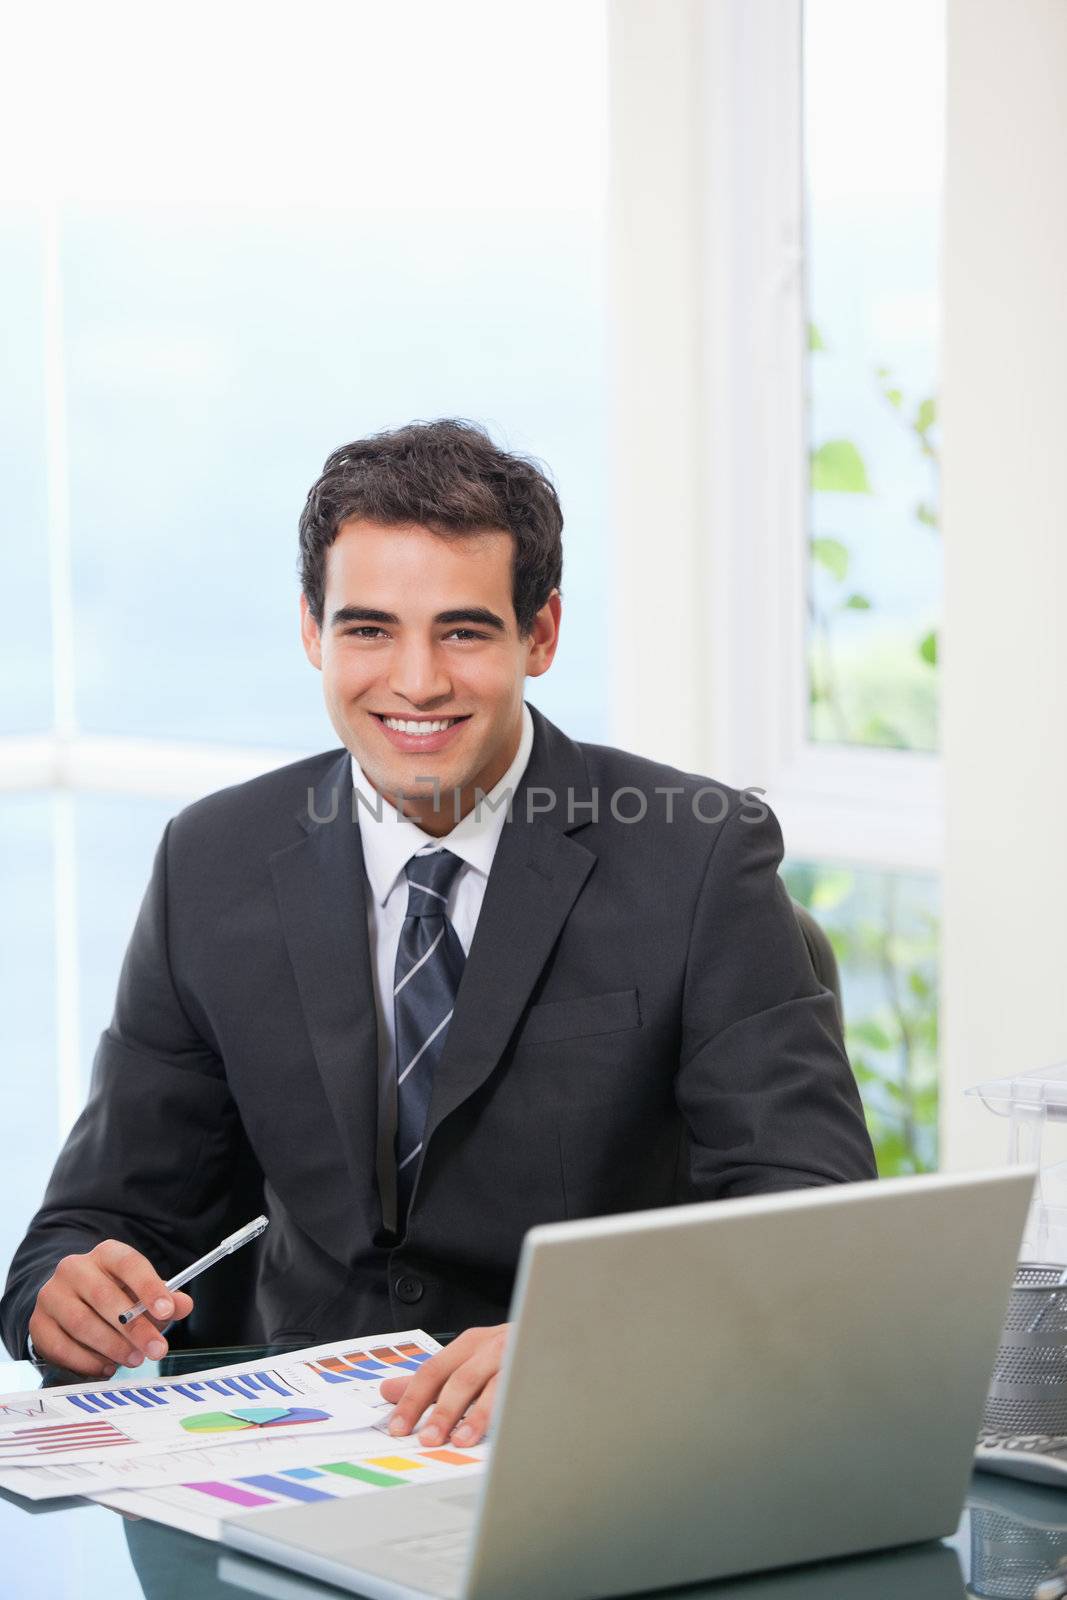 Man working on graph while smiling by Wavebreakmedia